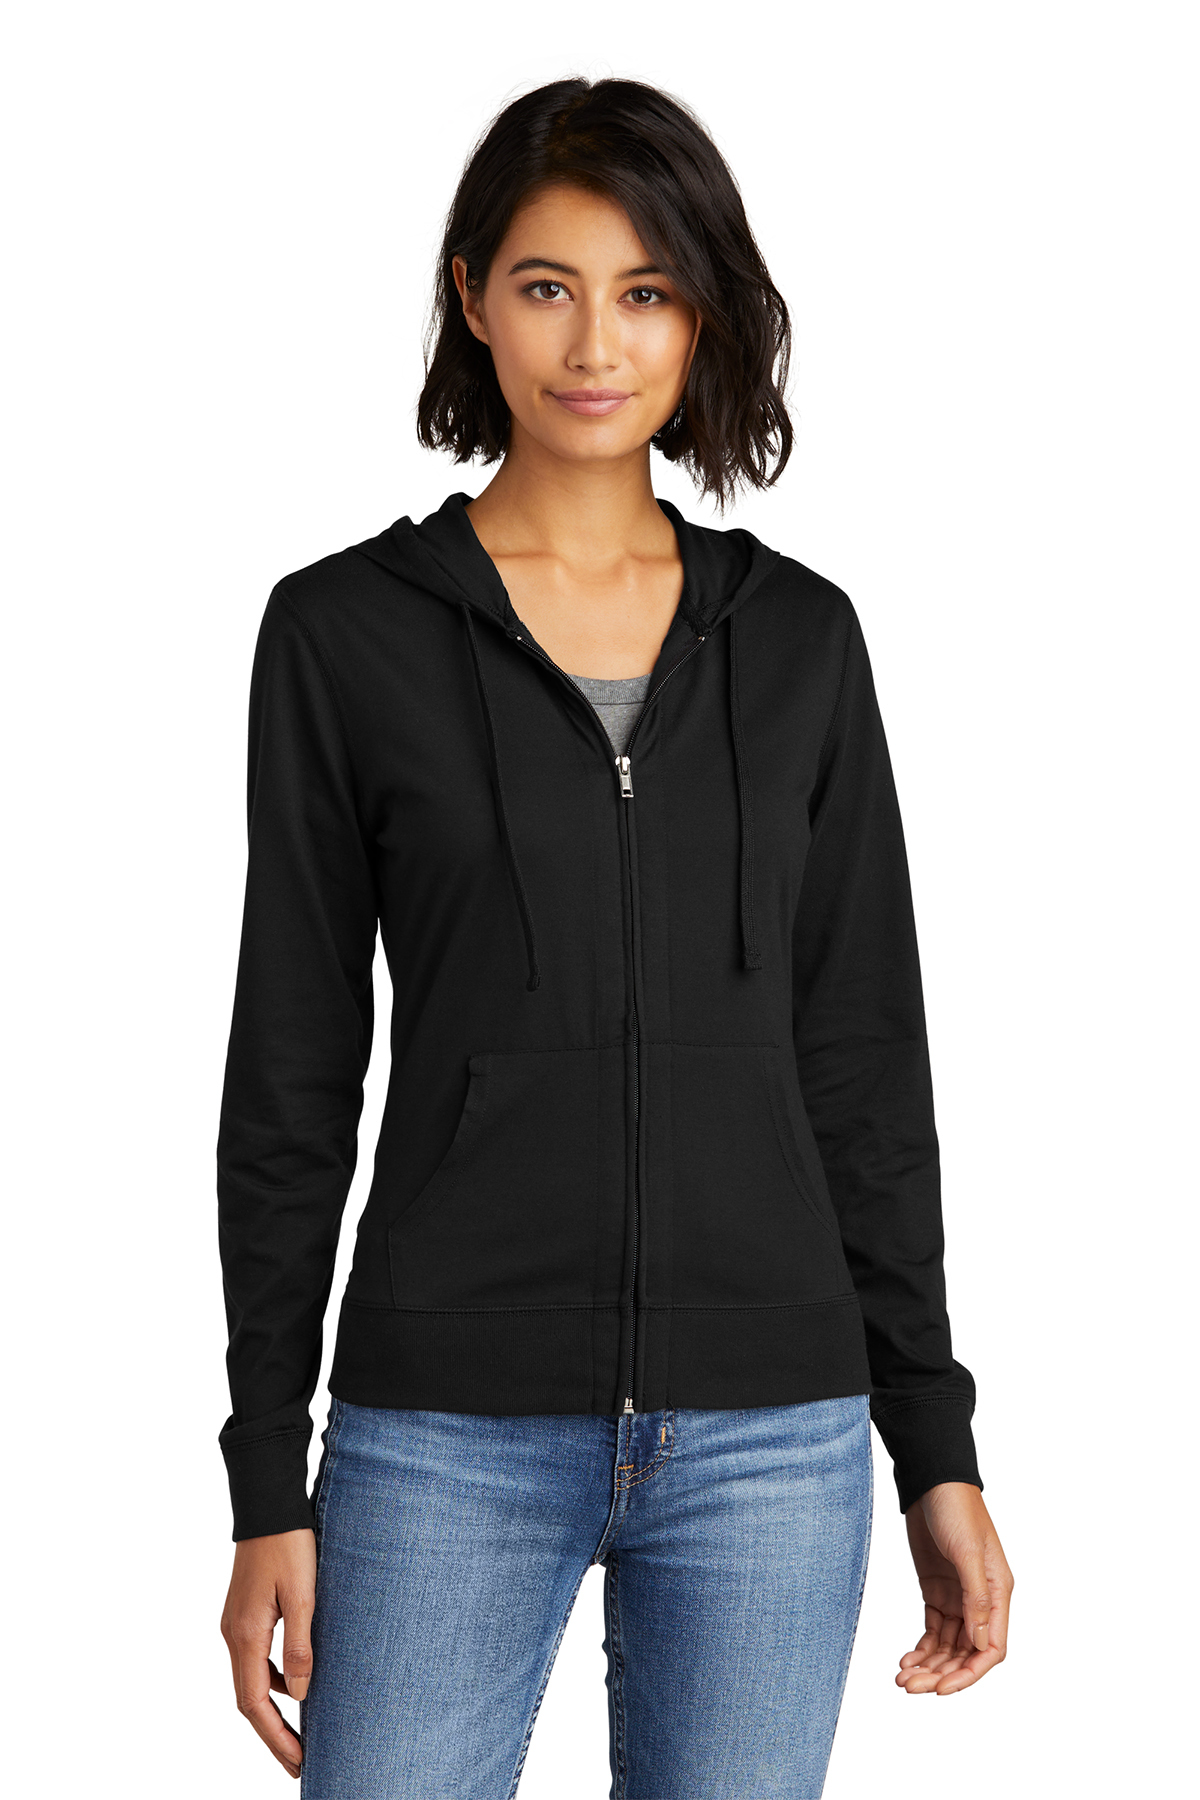 District Women’s Fitted Jersey Full-Zip Hoodie | Product | District